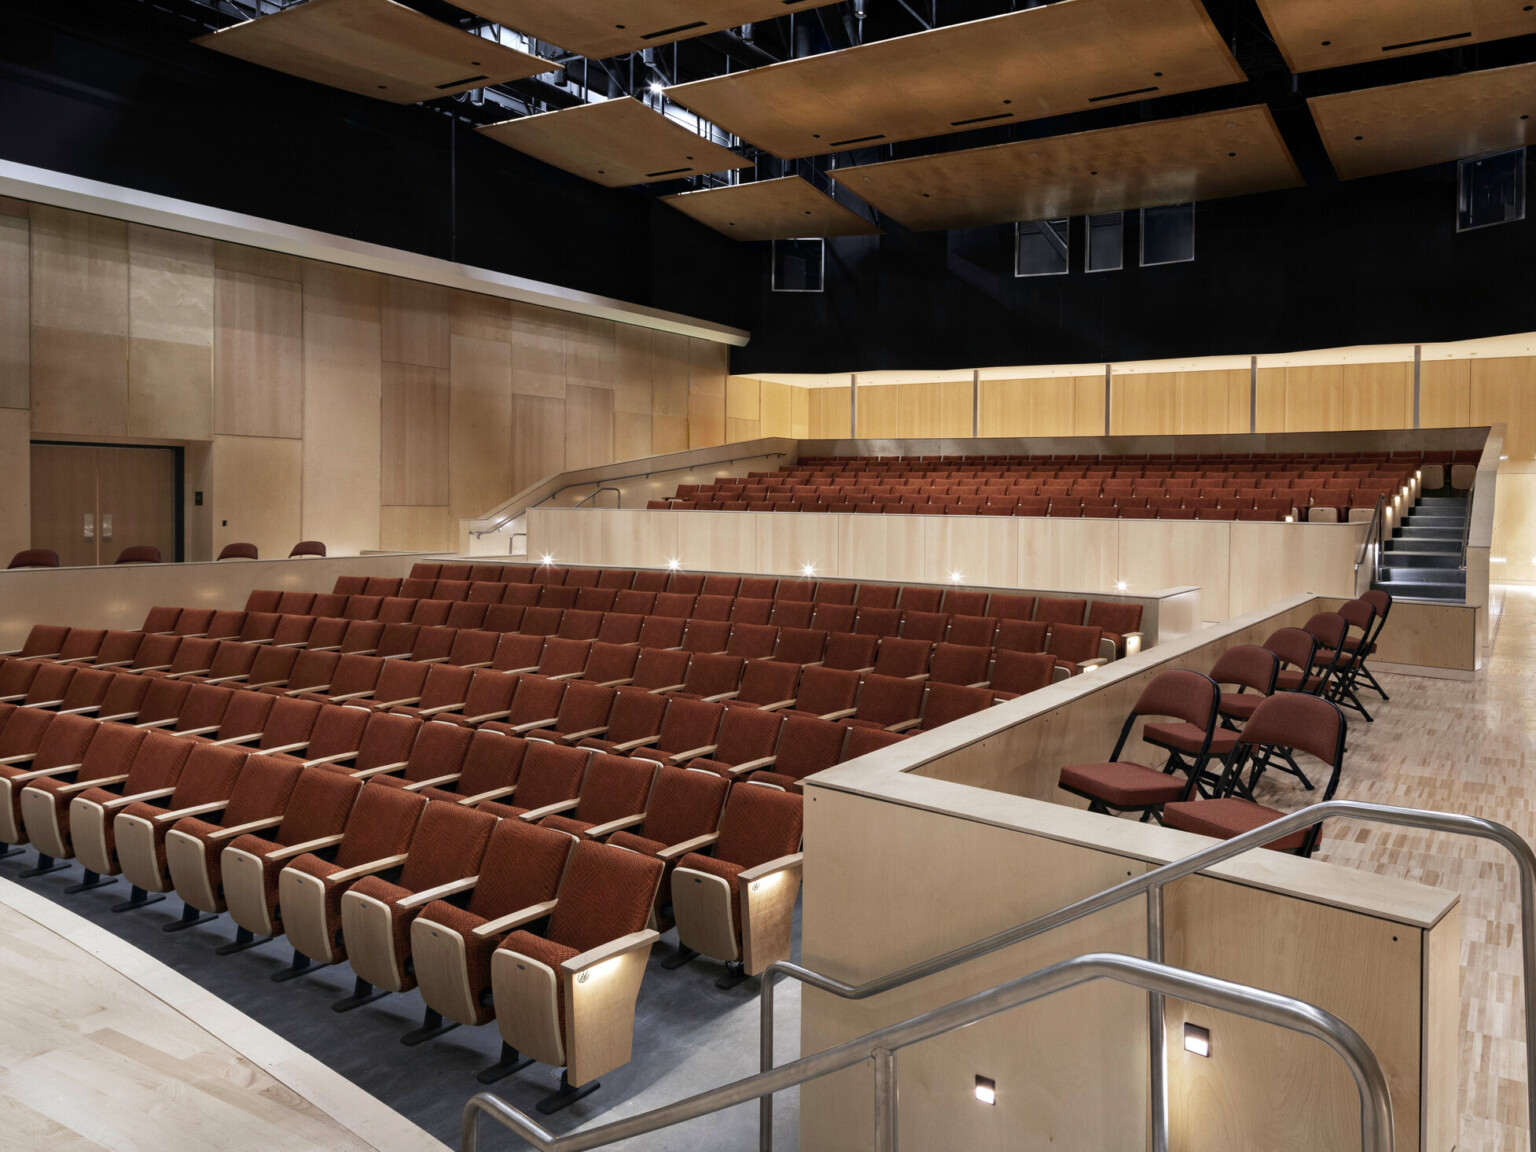 400-seat performance space, blonde wood walls and stage, looking to audience chamber with red seats